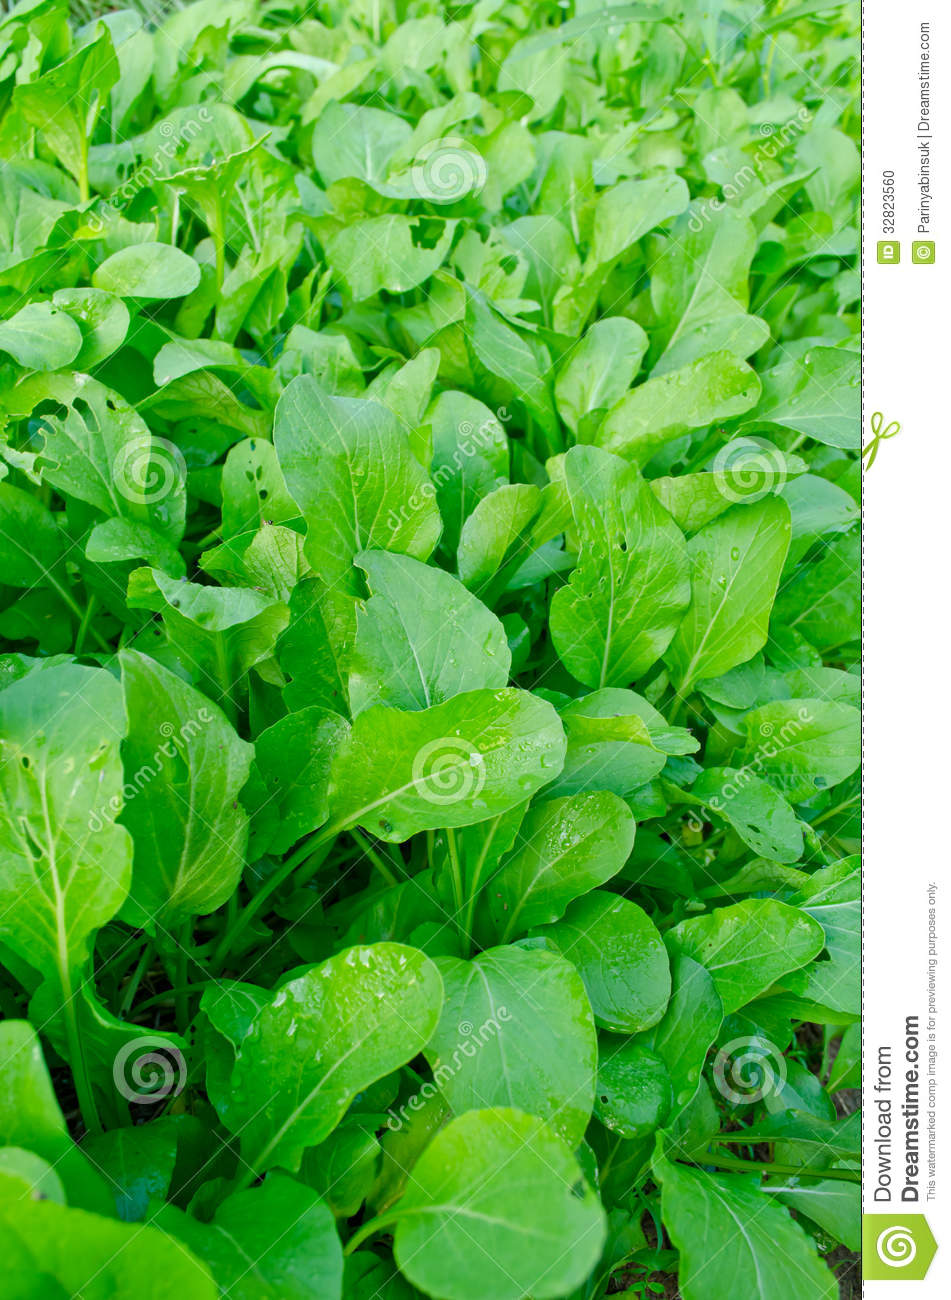 Chinese Kale Growing In Field  Stock Photo   Image  32823560